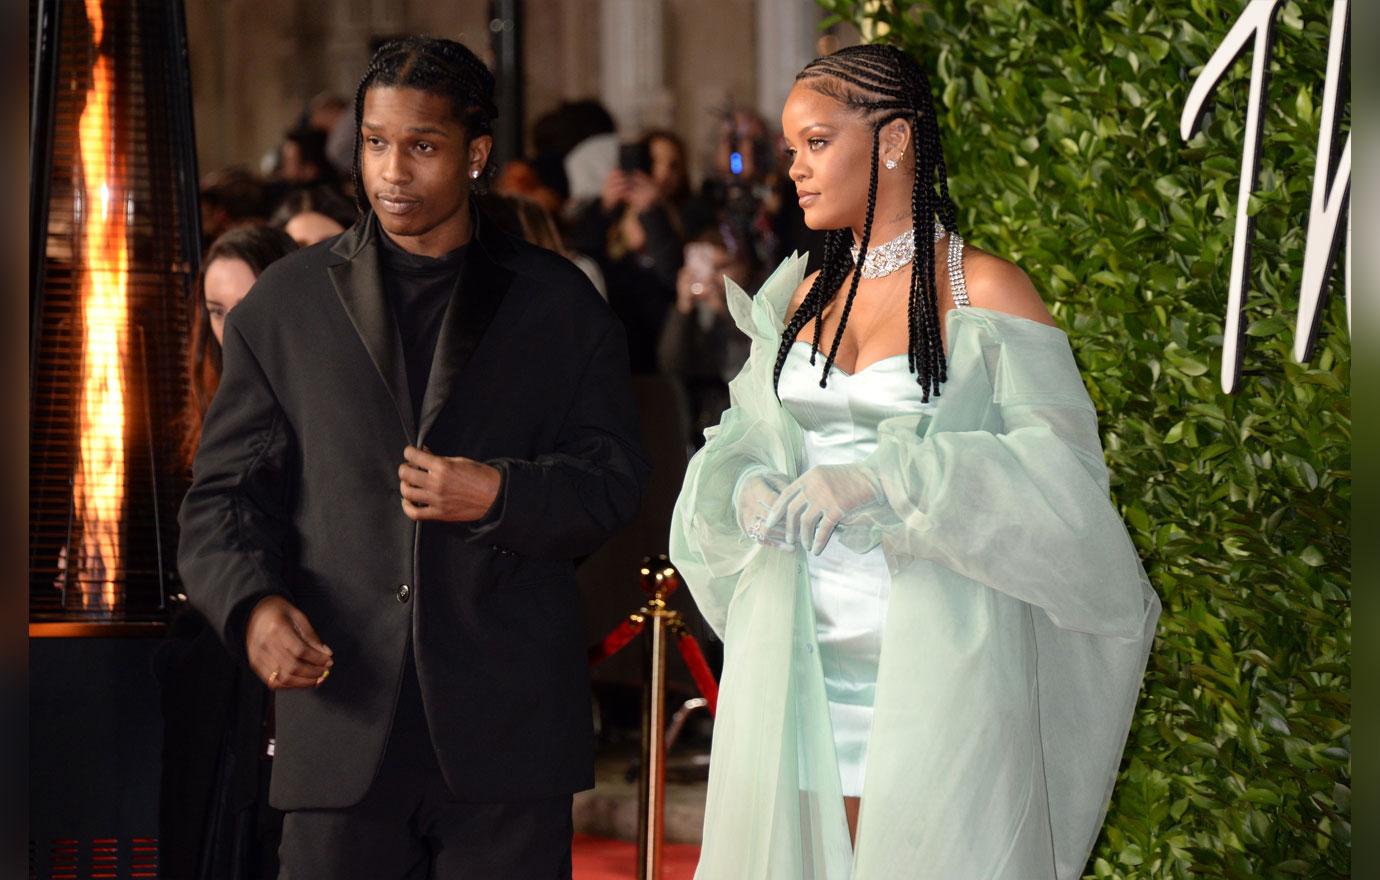 Rihanna Wows in Her Fenty Line at Fashion Awards 2019!: Photo 4396376, 2019 Fashion Awards, ASAP Rocky, Rihanna Photos